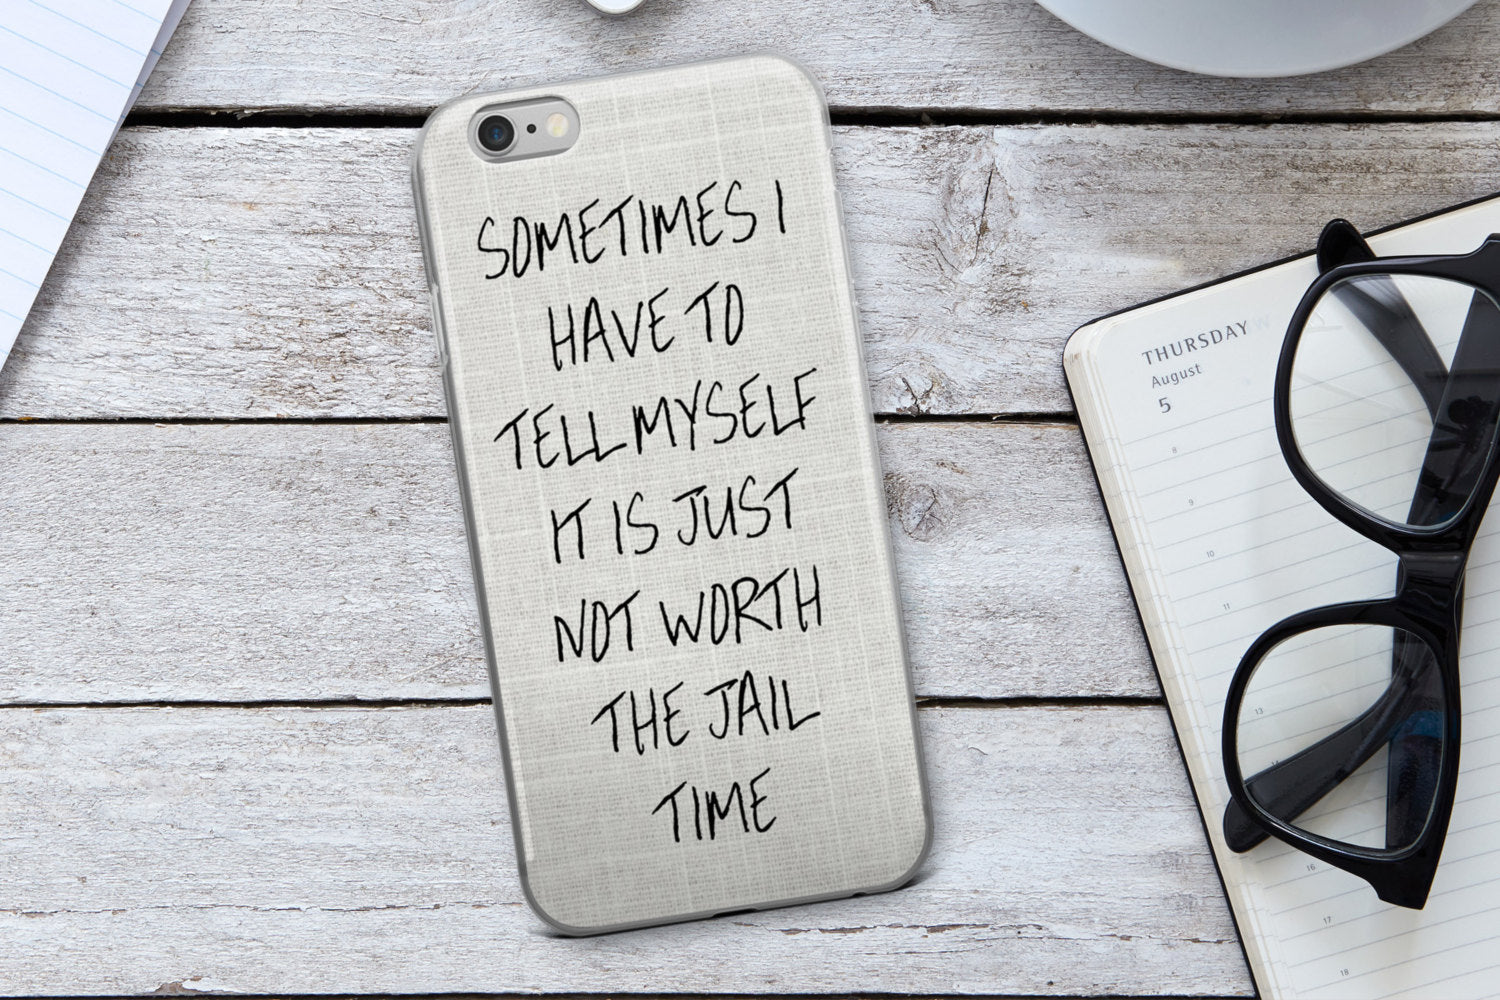 Not Worth The Jail Time Phone Case